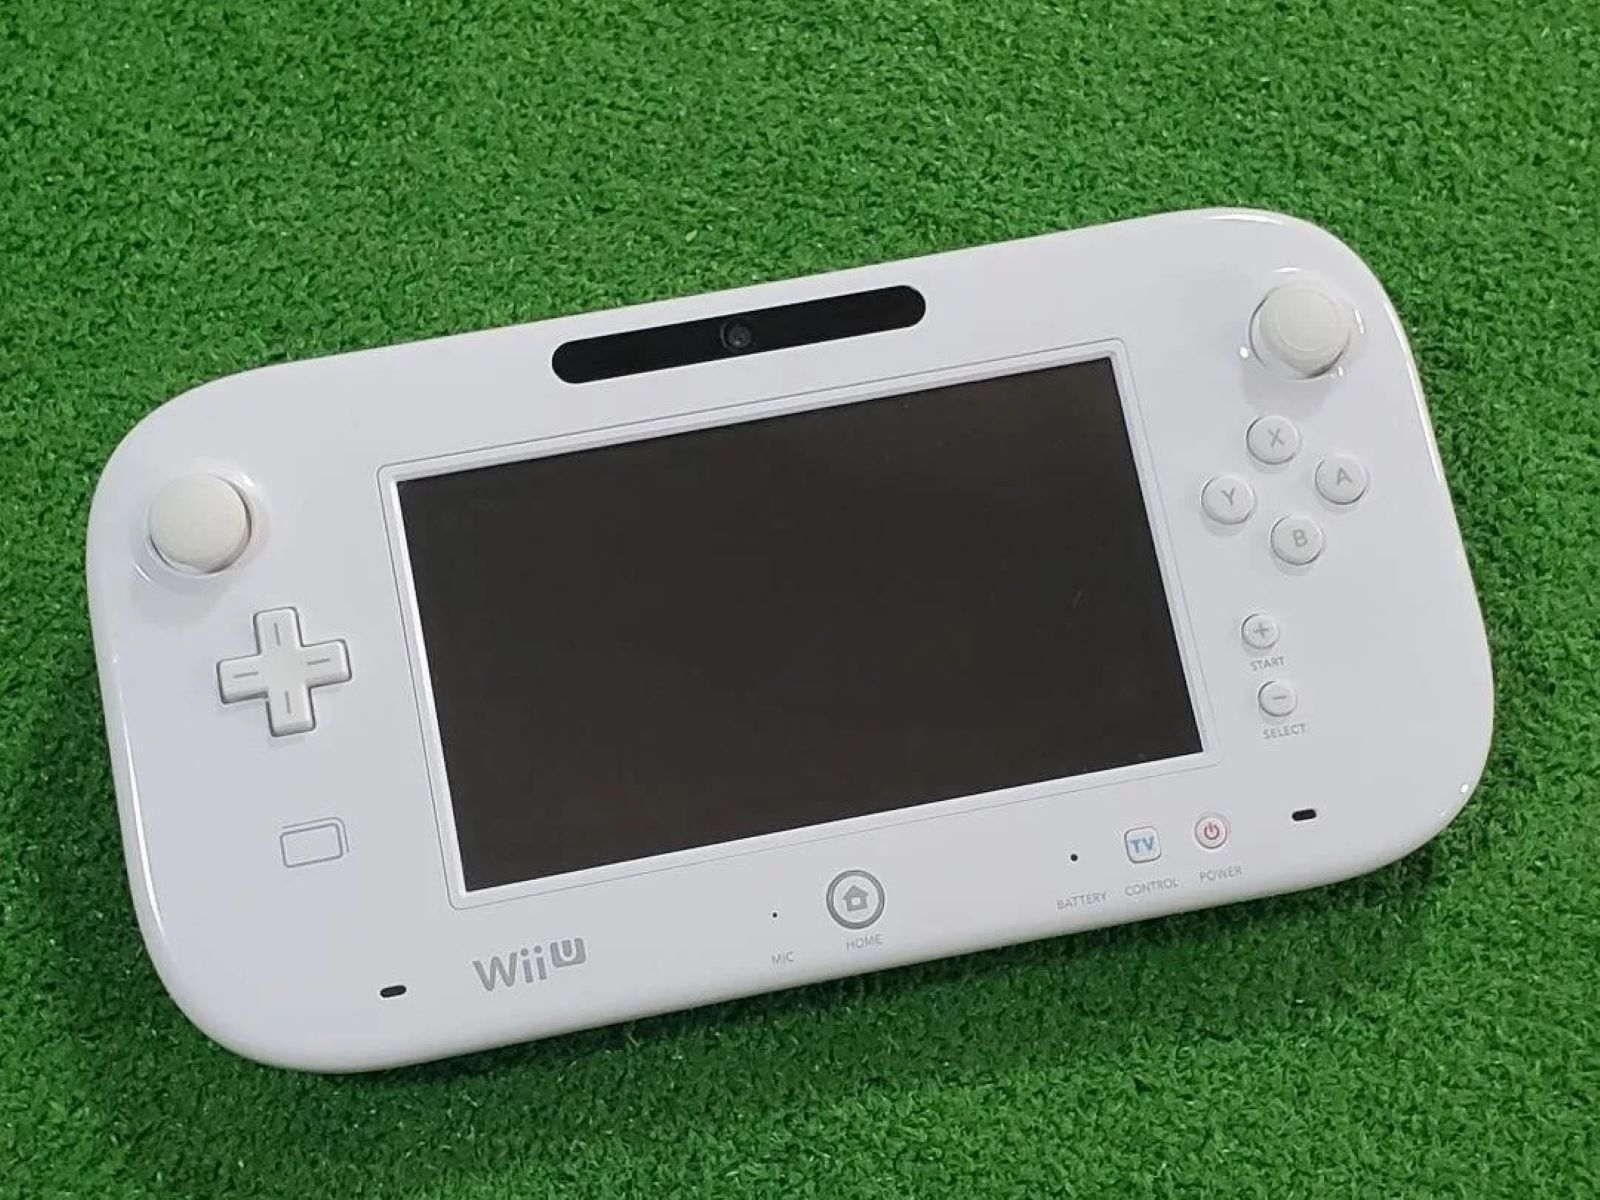 wii-u-gamepad-replacement-where-and-how-to-get-one